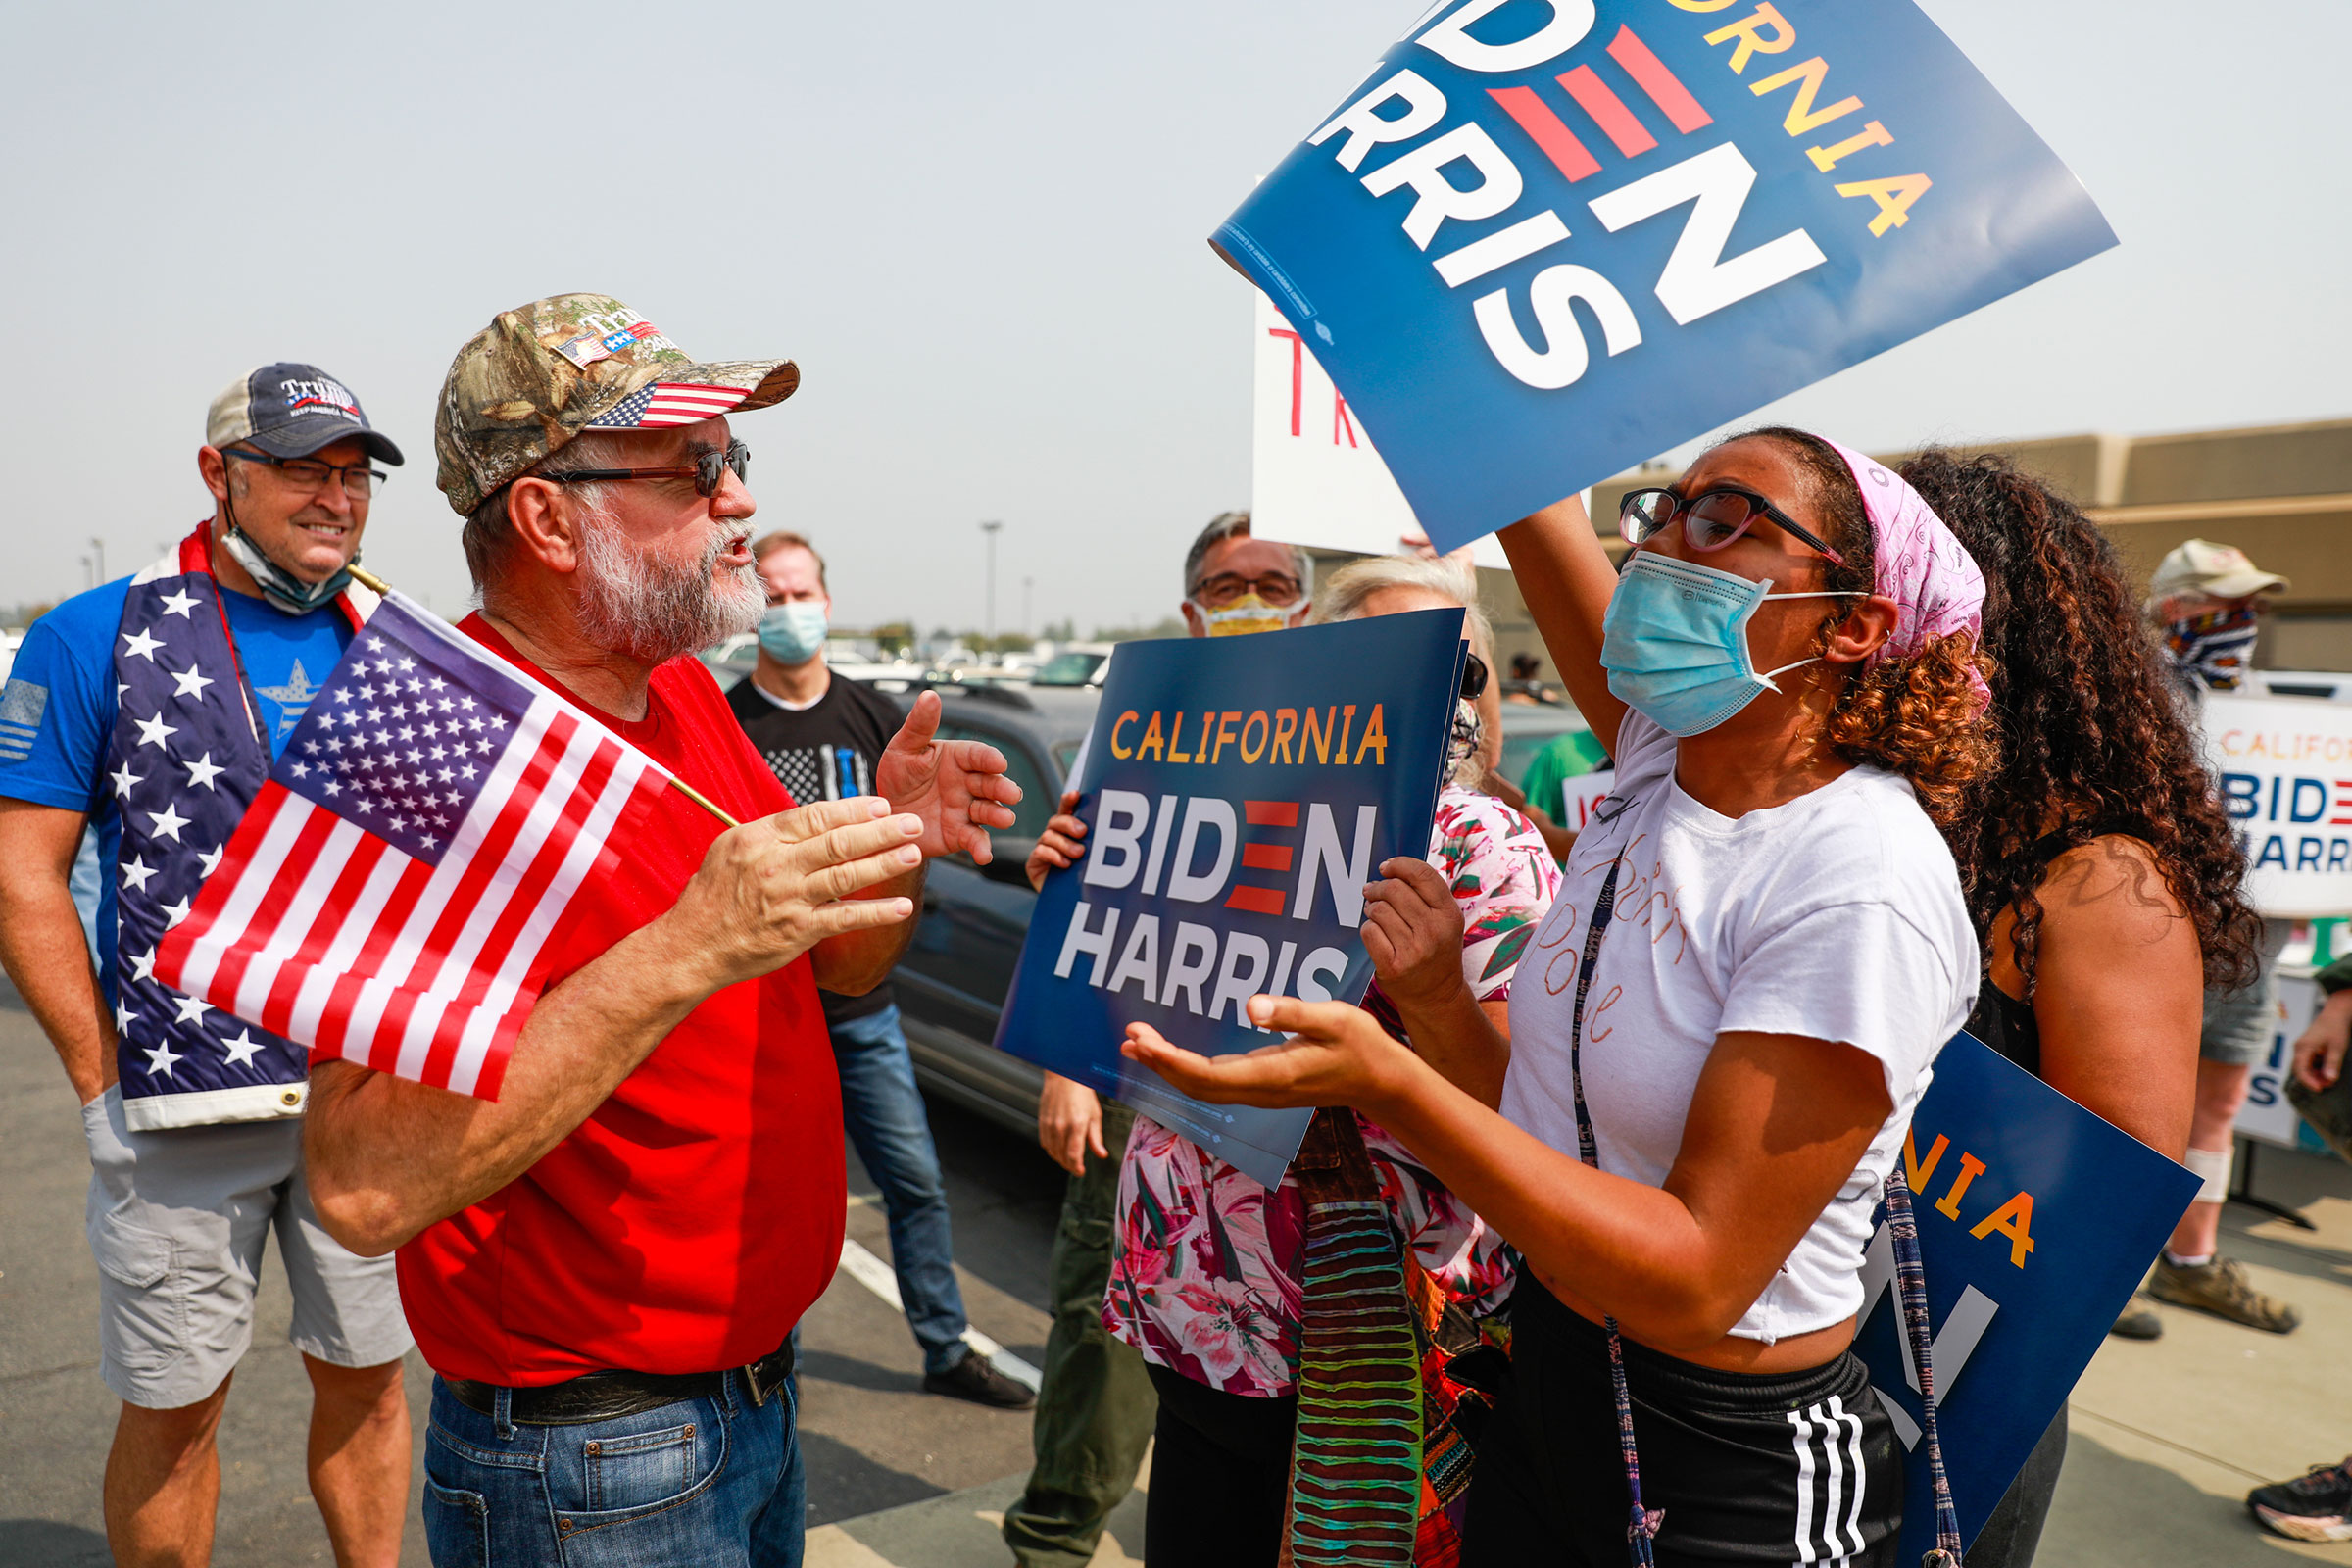 A Trump supporter argues with a Biden supporter on the street outside Sacramento McClellan Airport as President Donald Trump was being briefed on wildfires in a hangar in McClellan Park, Sacramento, Calif., on Sept. 14, 2020. (Gabrielle Lurie—The San Francisco Chronicle/Getty Images)